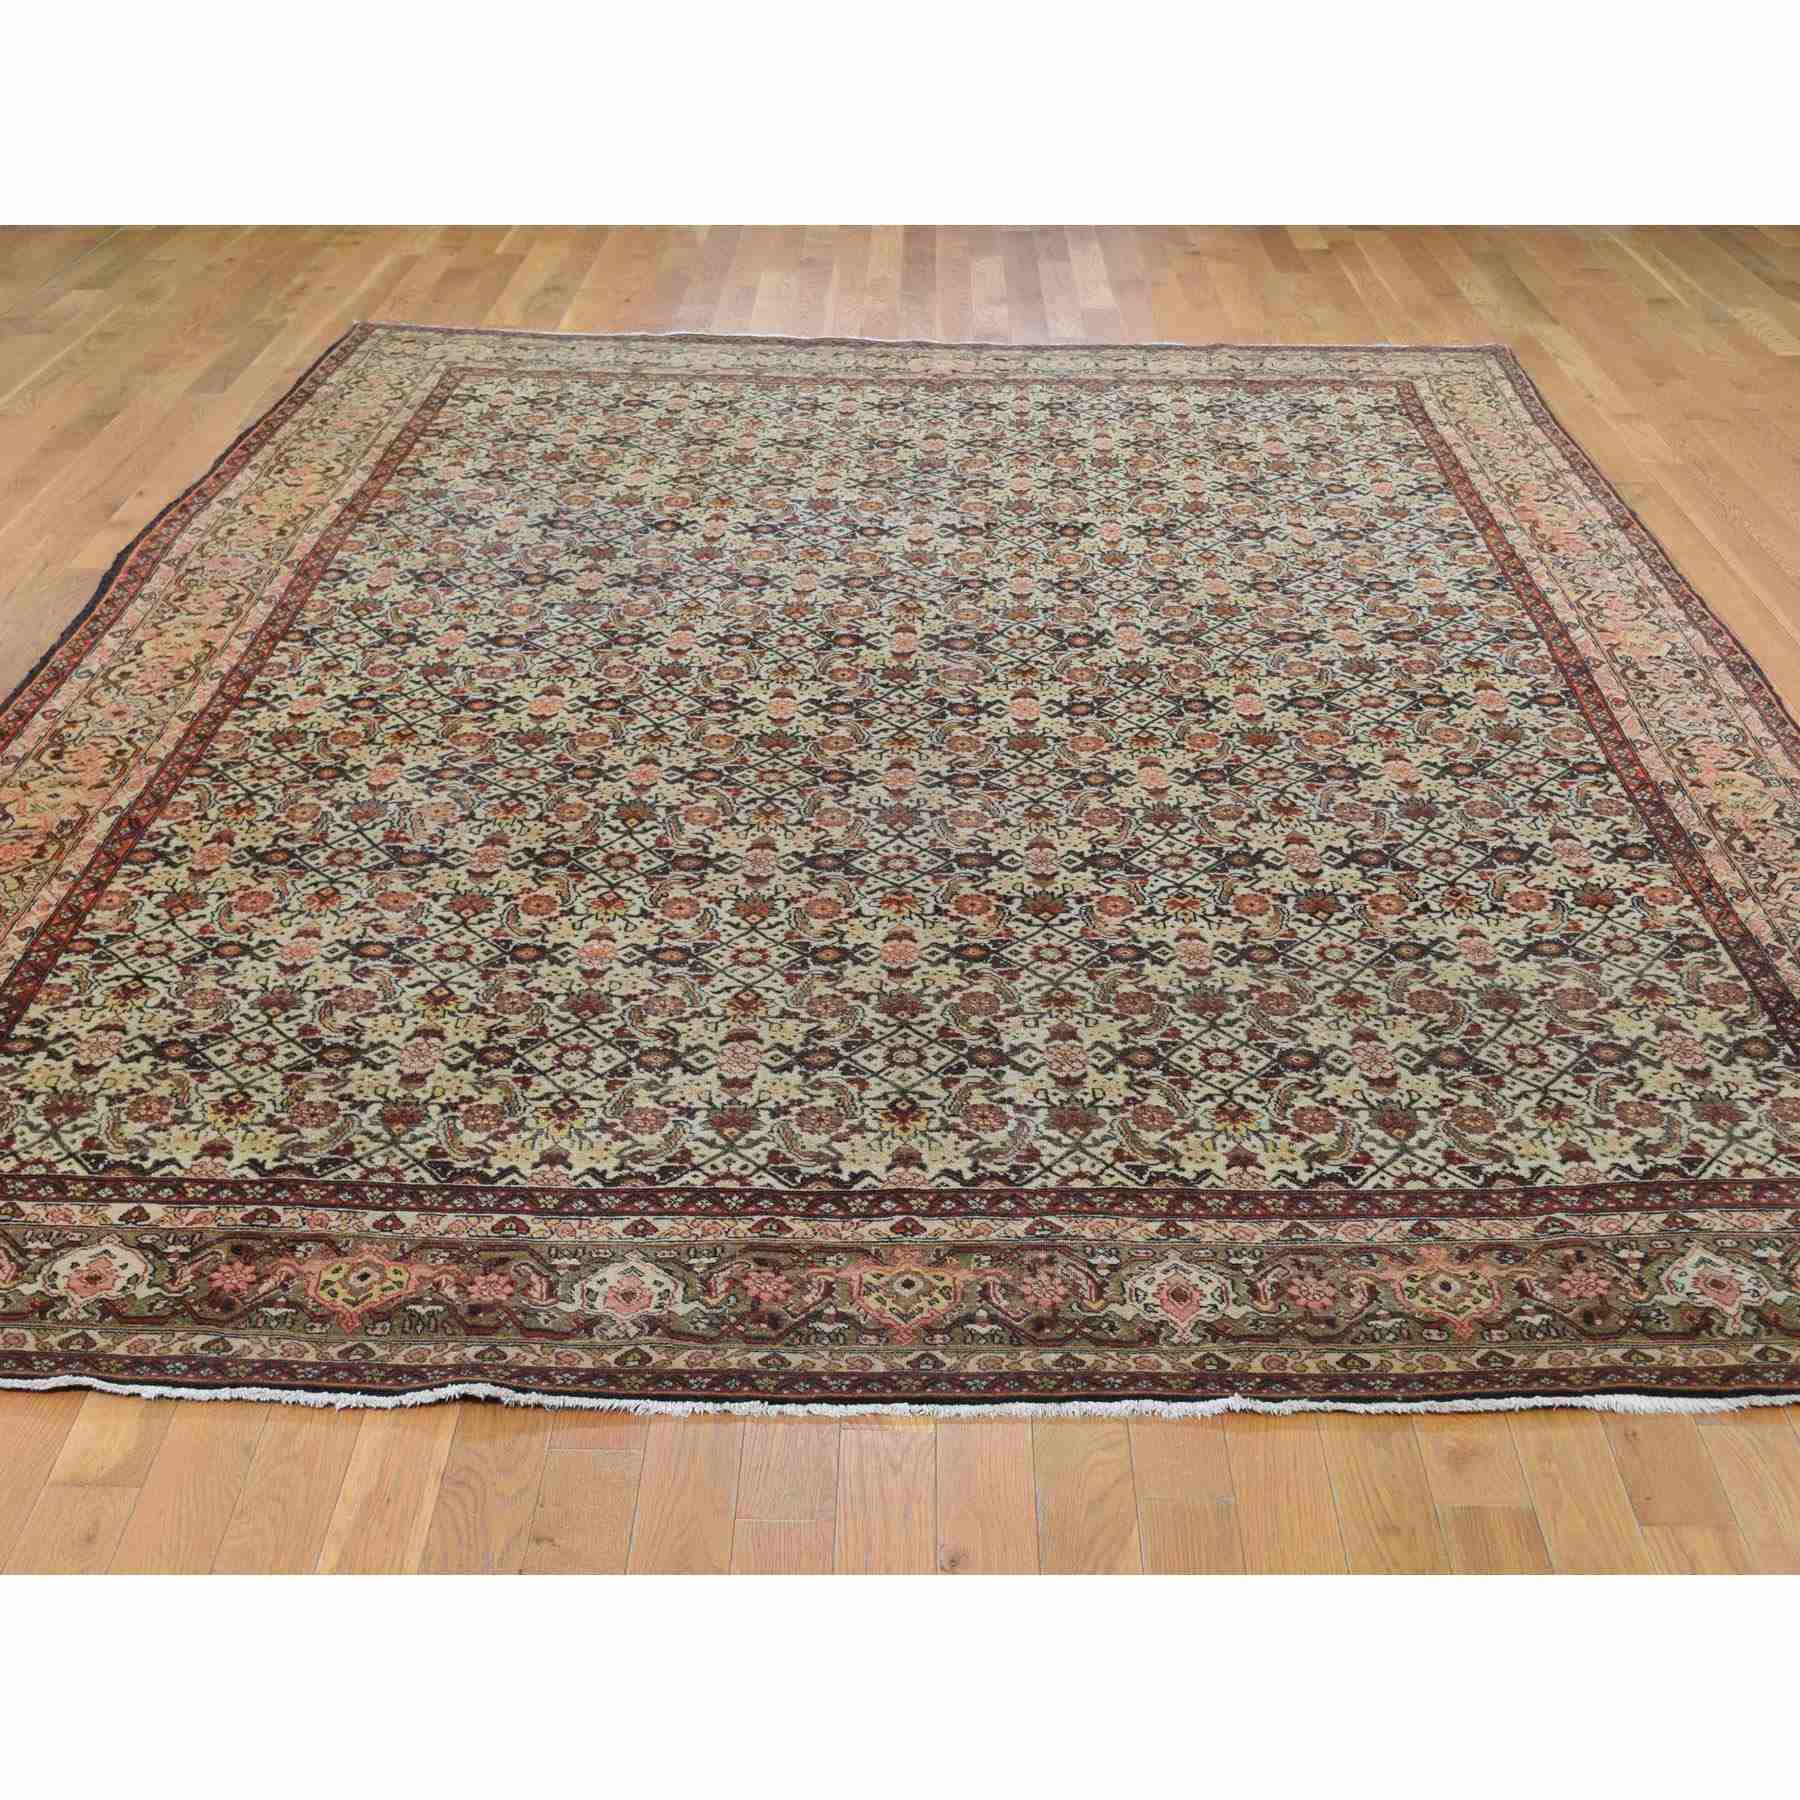 Antique-Hand-Knotted-Rug-239920